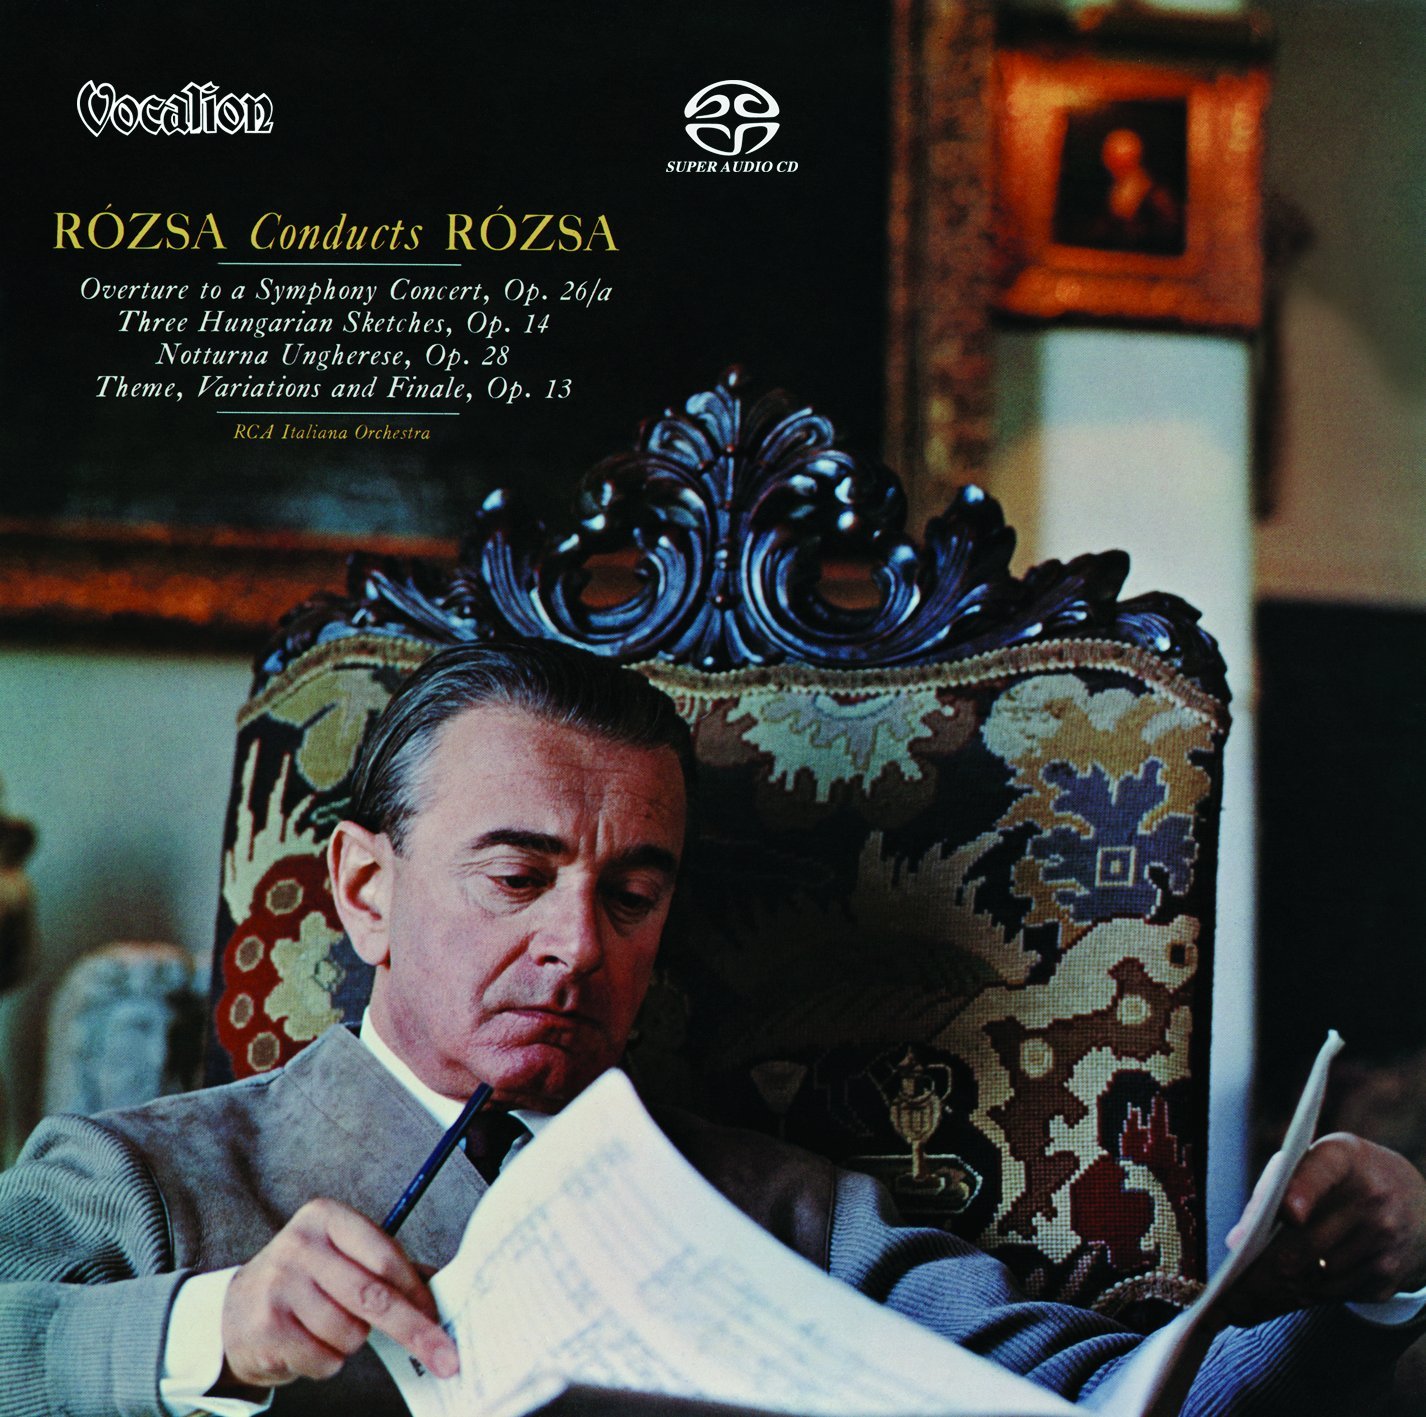 Miklos Rozsa, RCA Italiana Orchestra – Rozsa Conducts Rozsa (1965) [Reissue 2017] MCH SACD ISO + Hi-Res FLAC